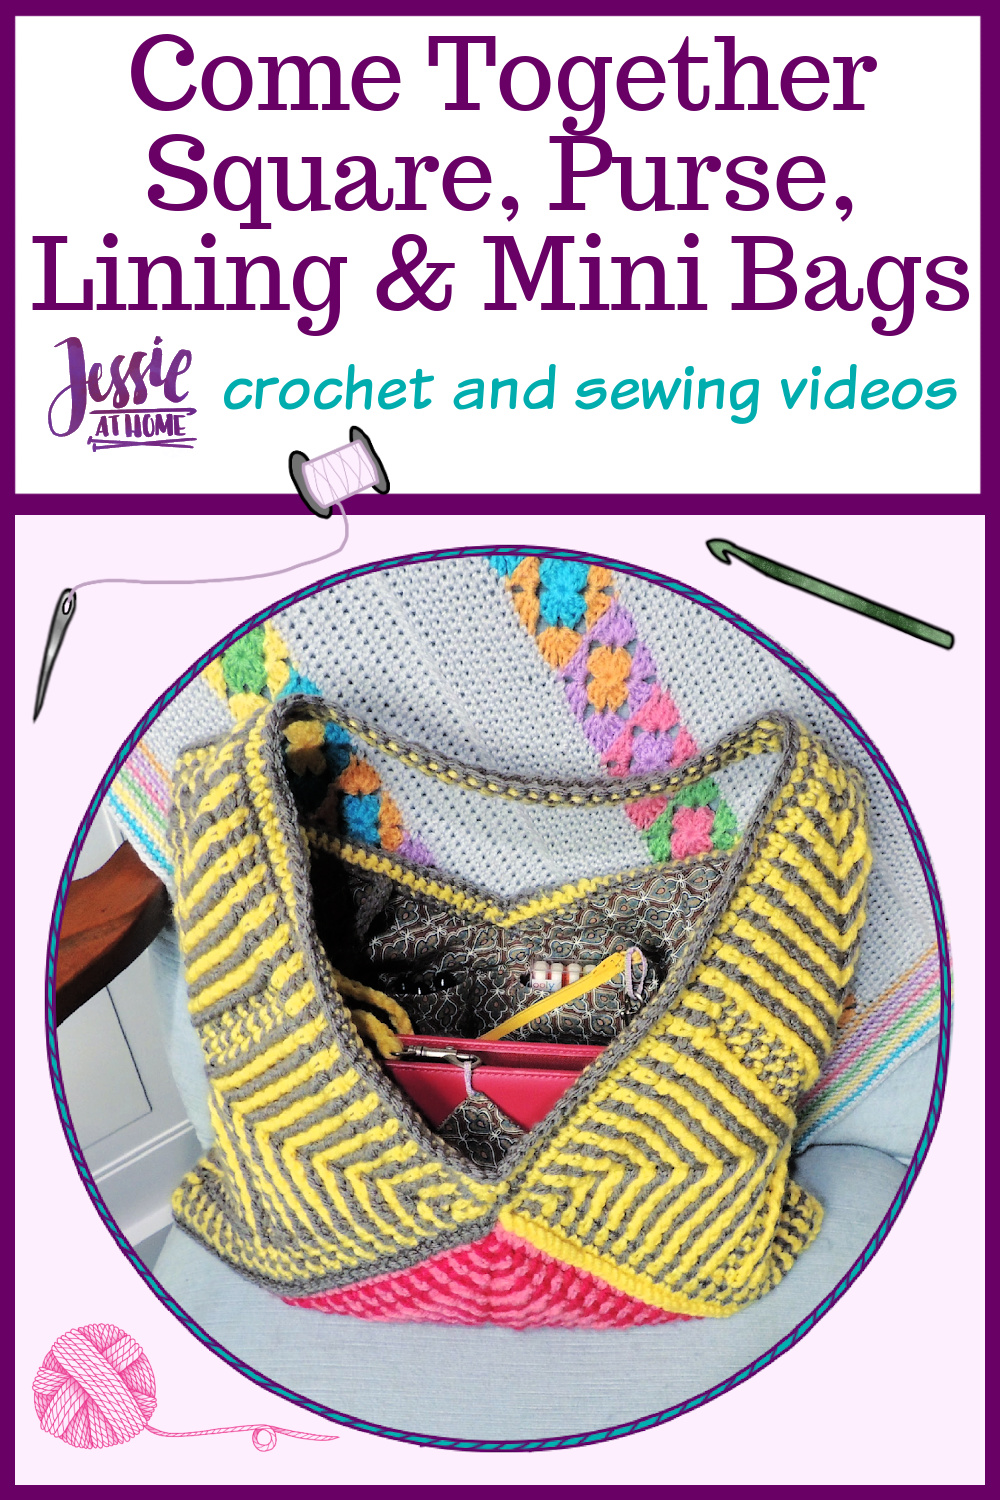 Come Together Square, Purse, Lining & Mini Bags Video Tutorials by Jessie At Home - Pin 1